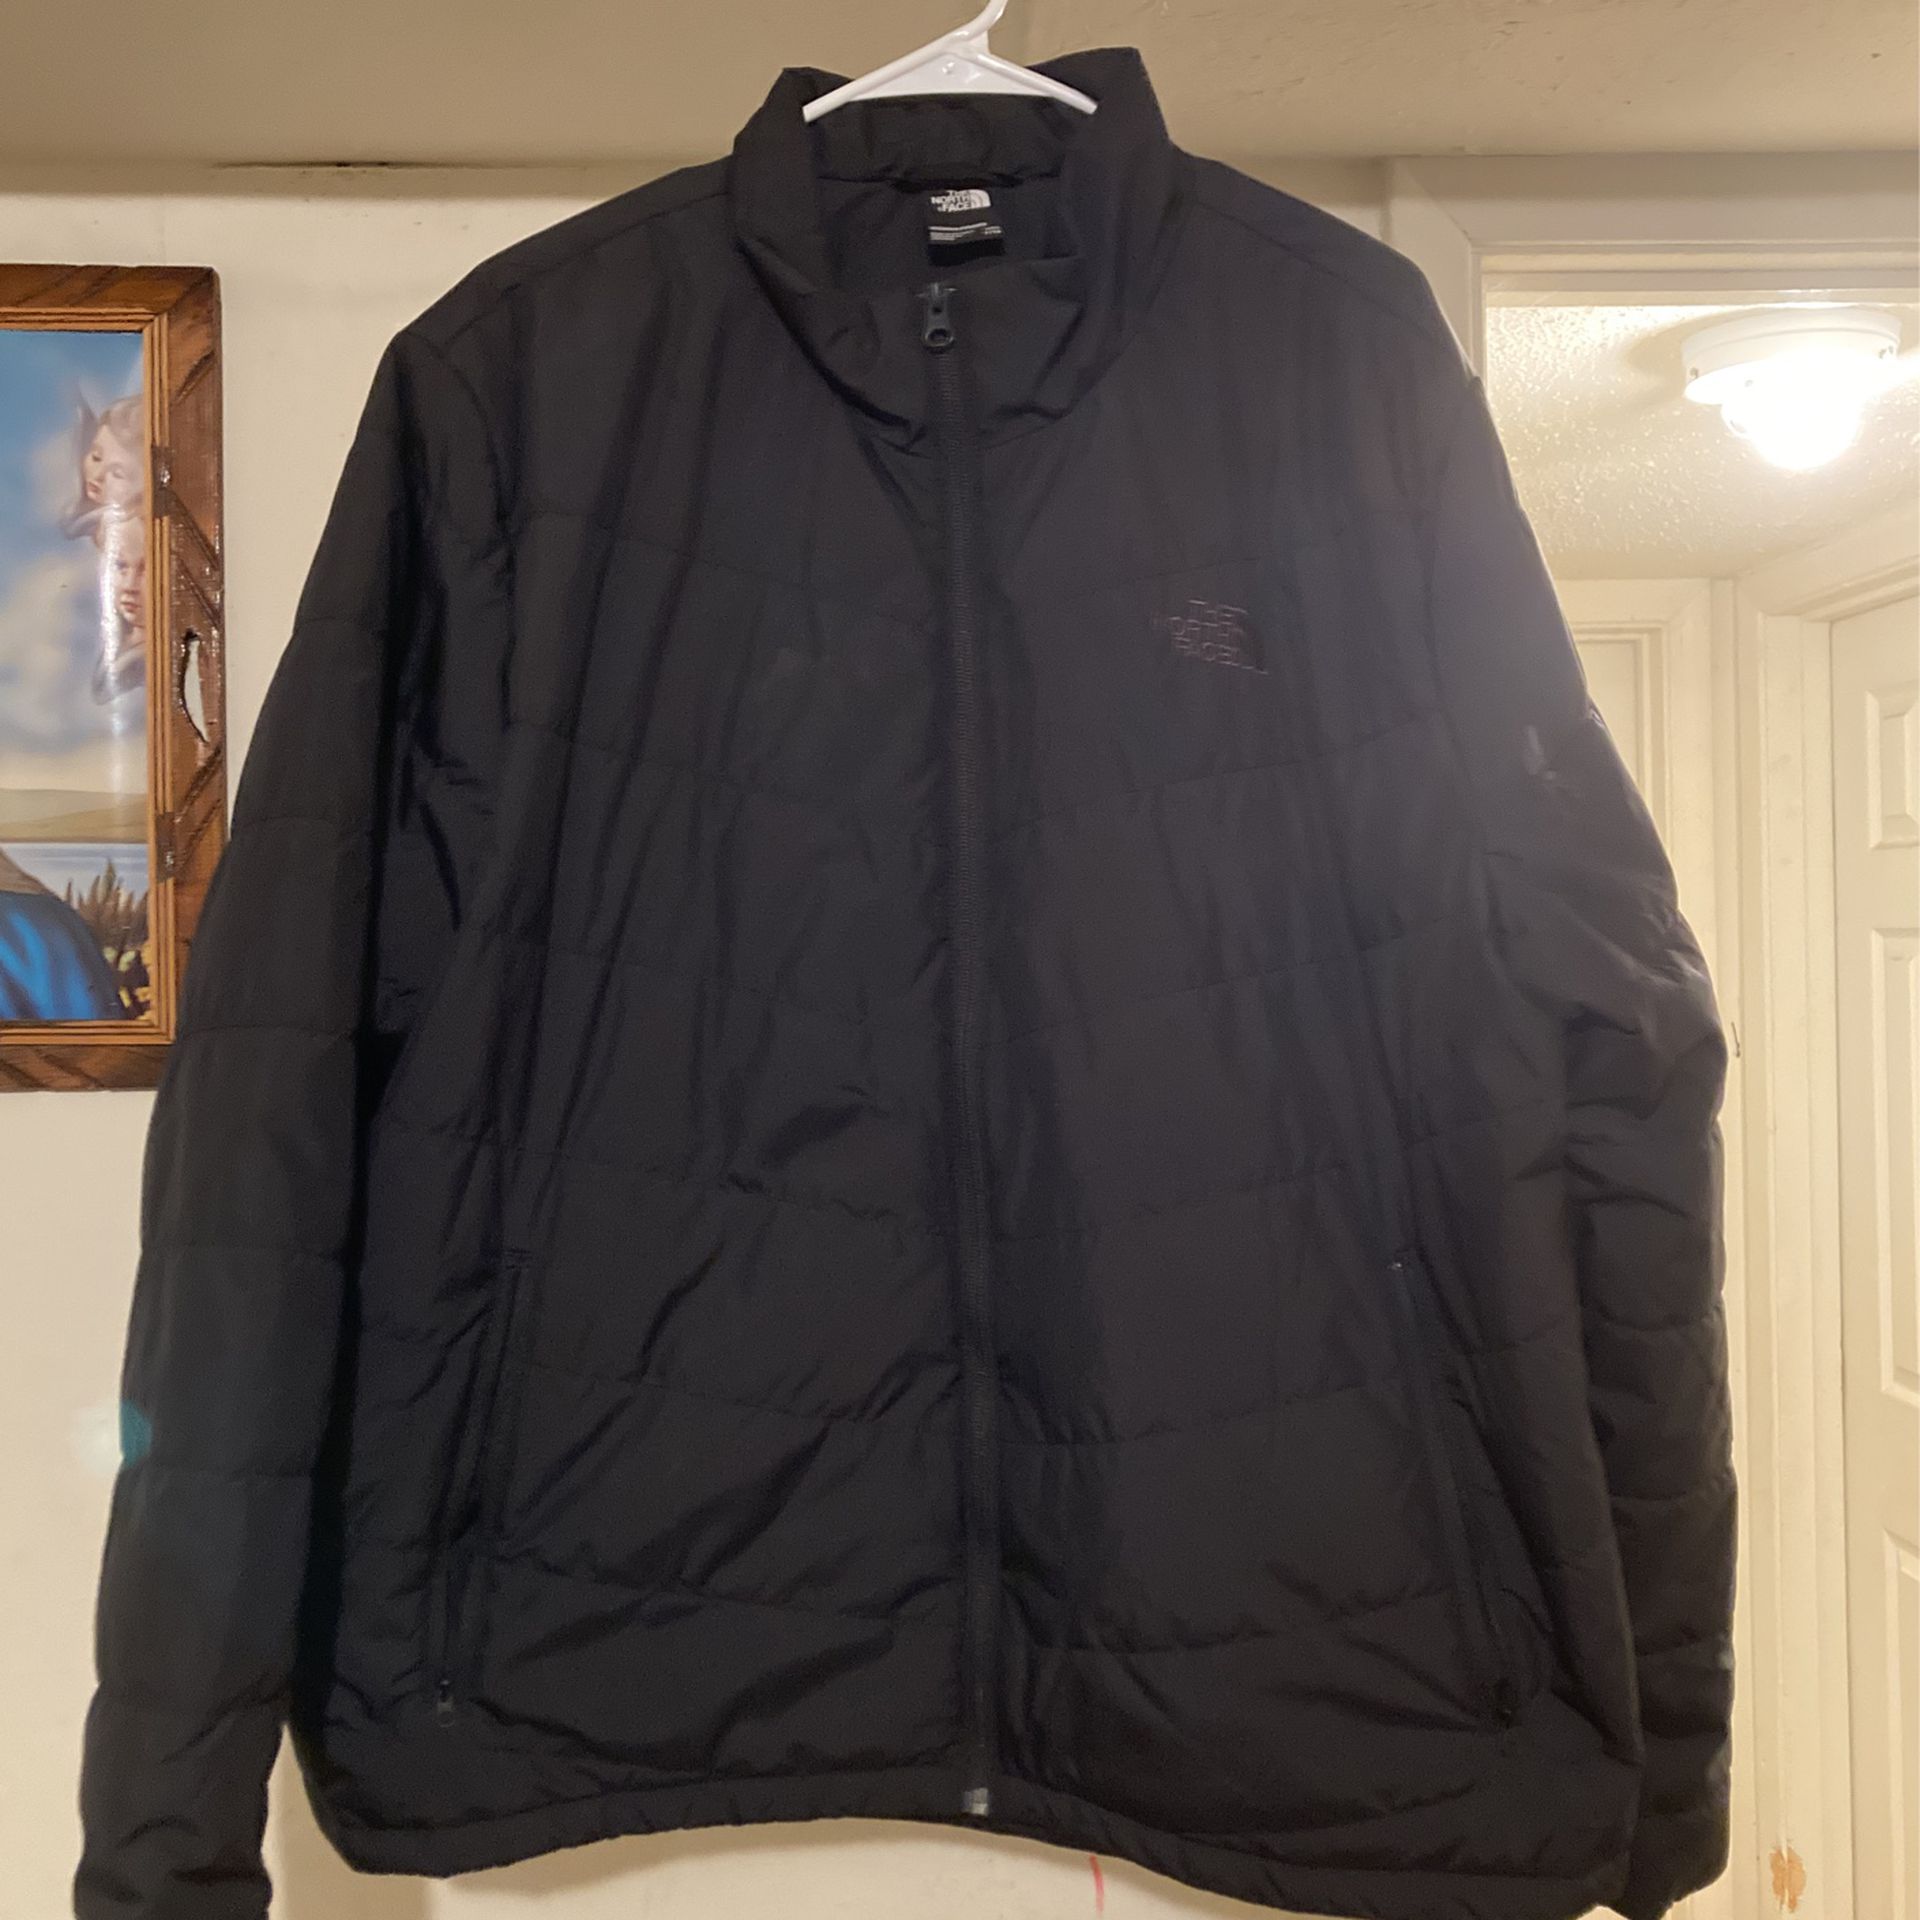 The North Face Jacket Size 3x Only Use 1st 